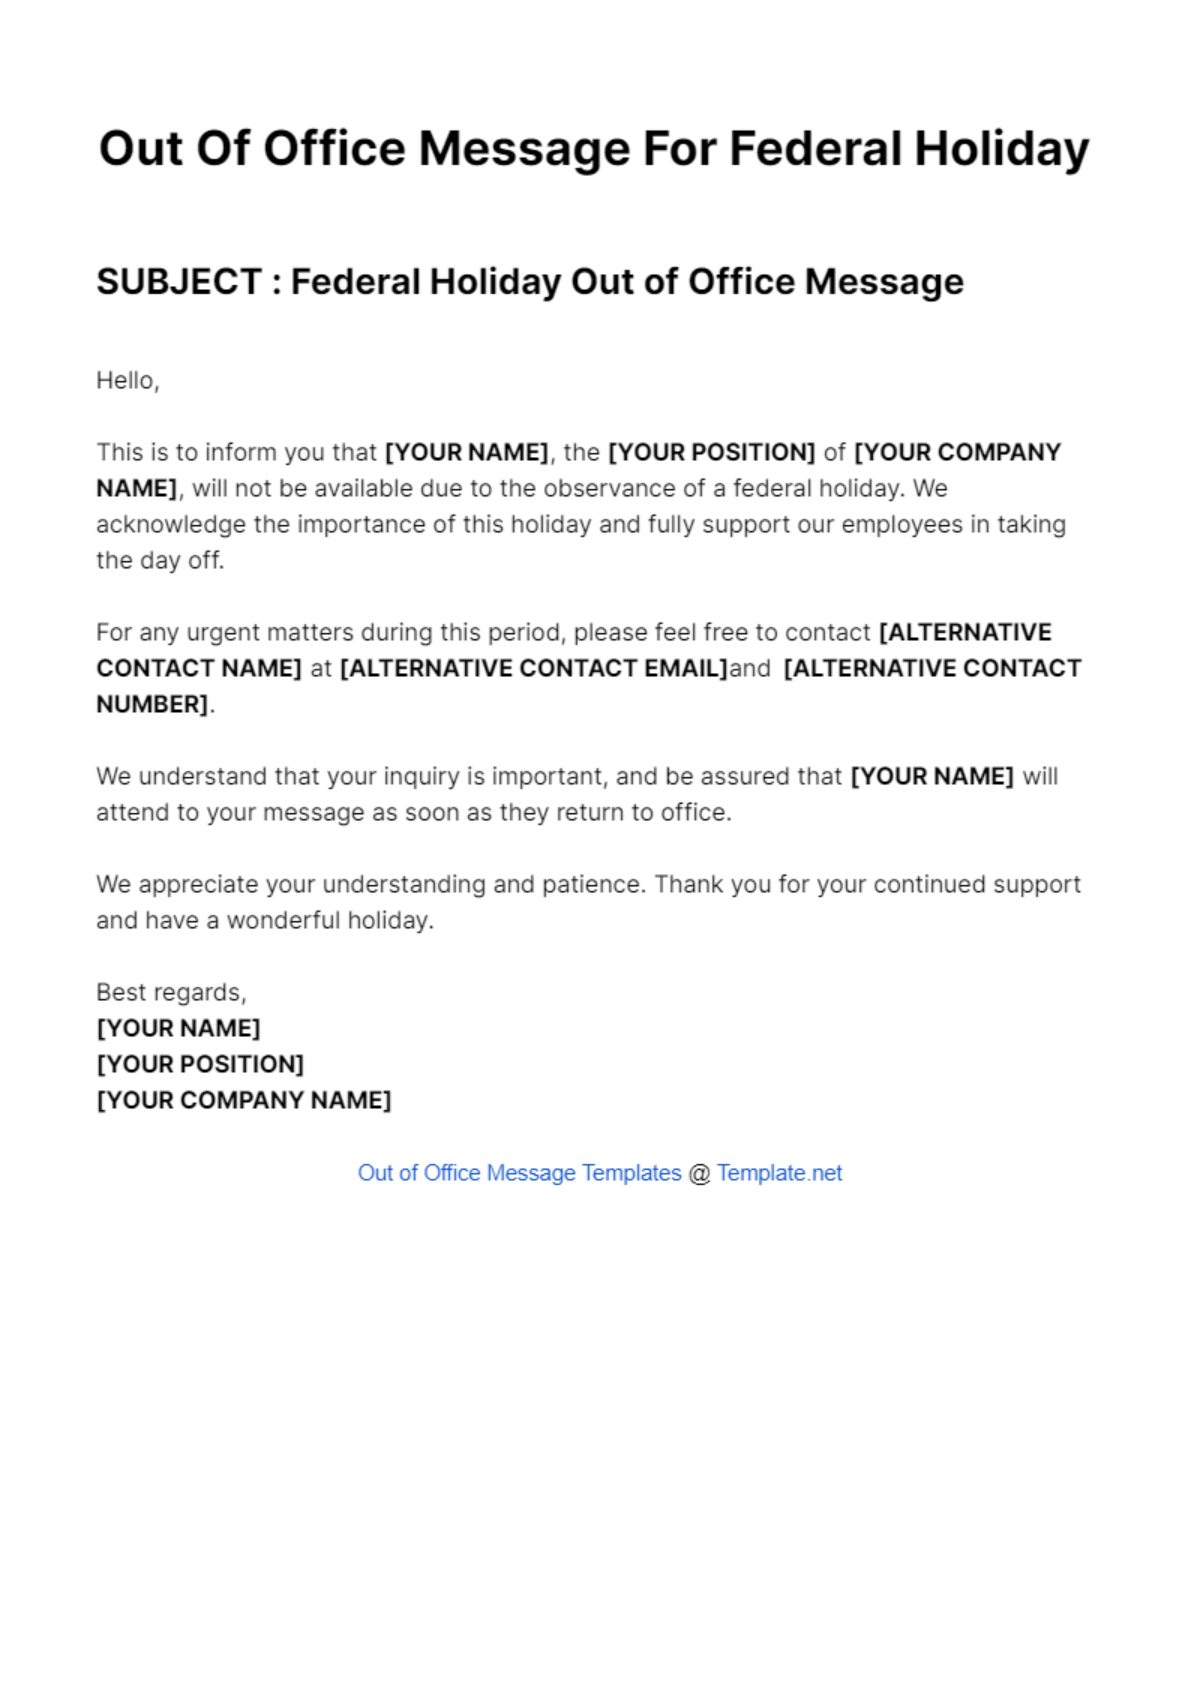 Free Out Of Office Message For Federal Holiday Template